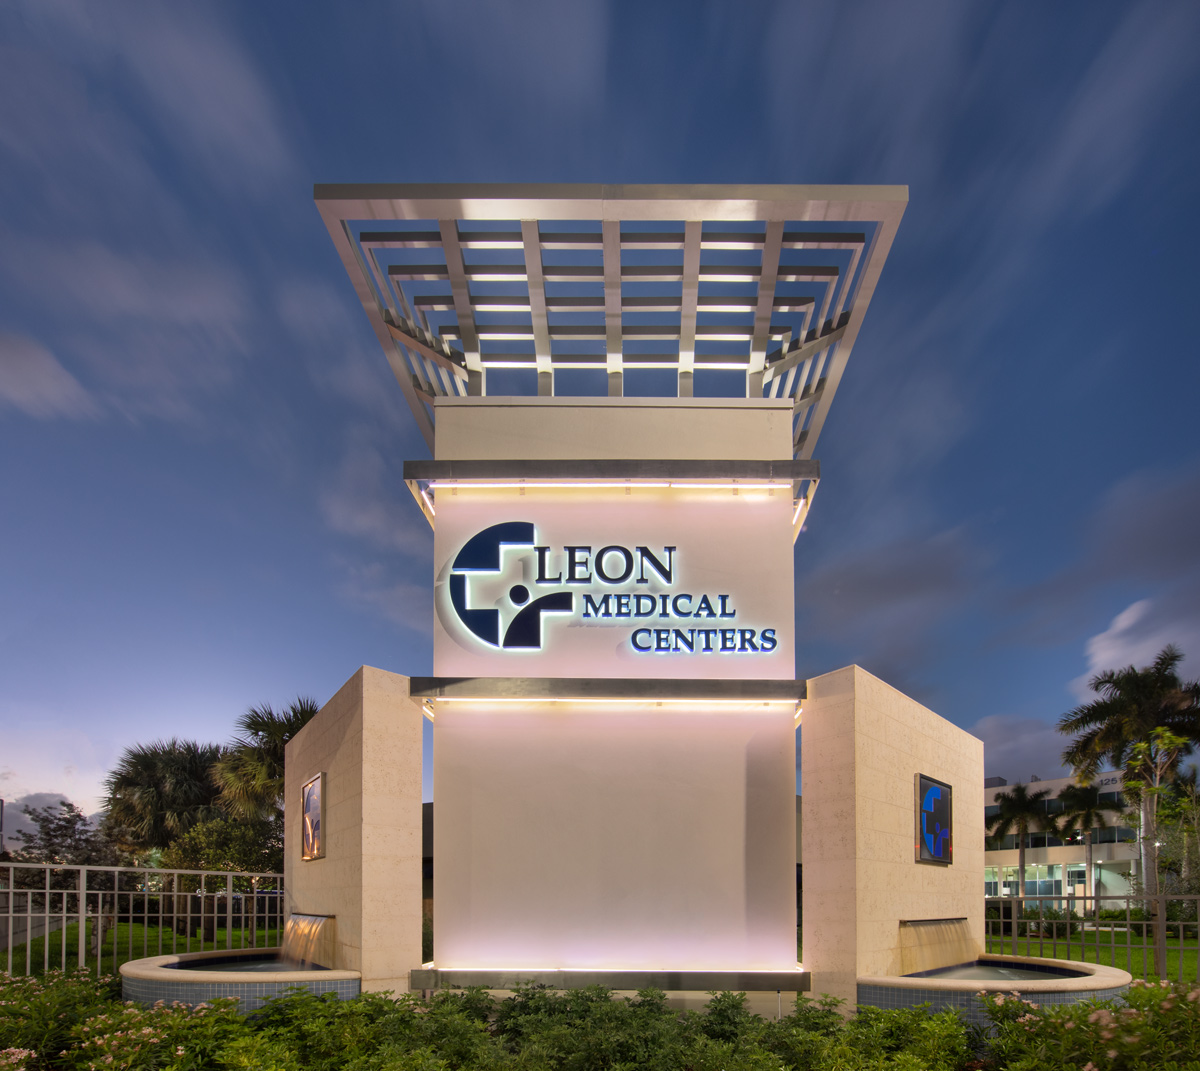 Monument signage of the Leon Medical Center in Kendall, FL